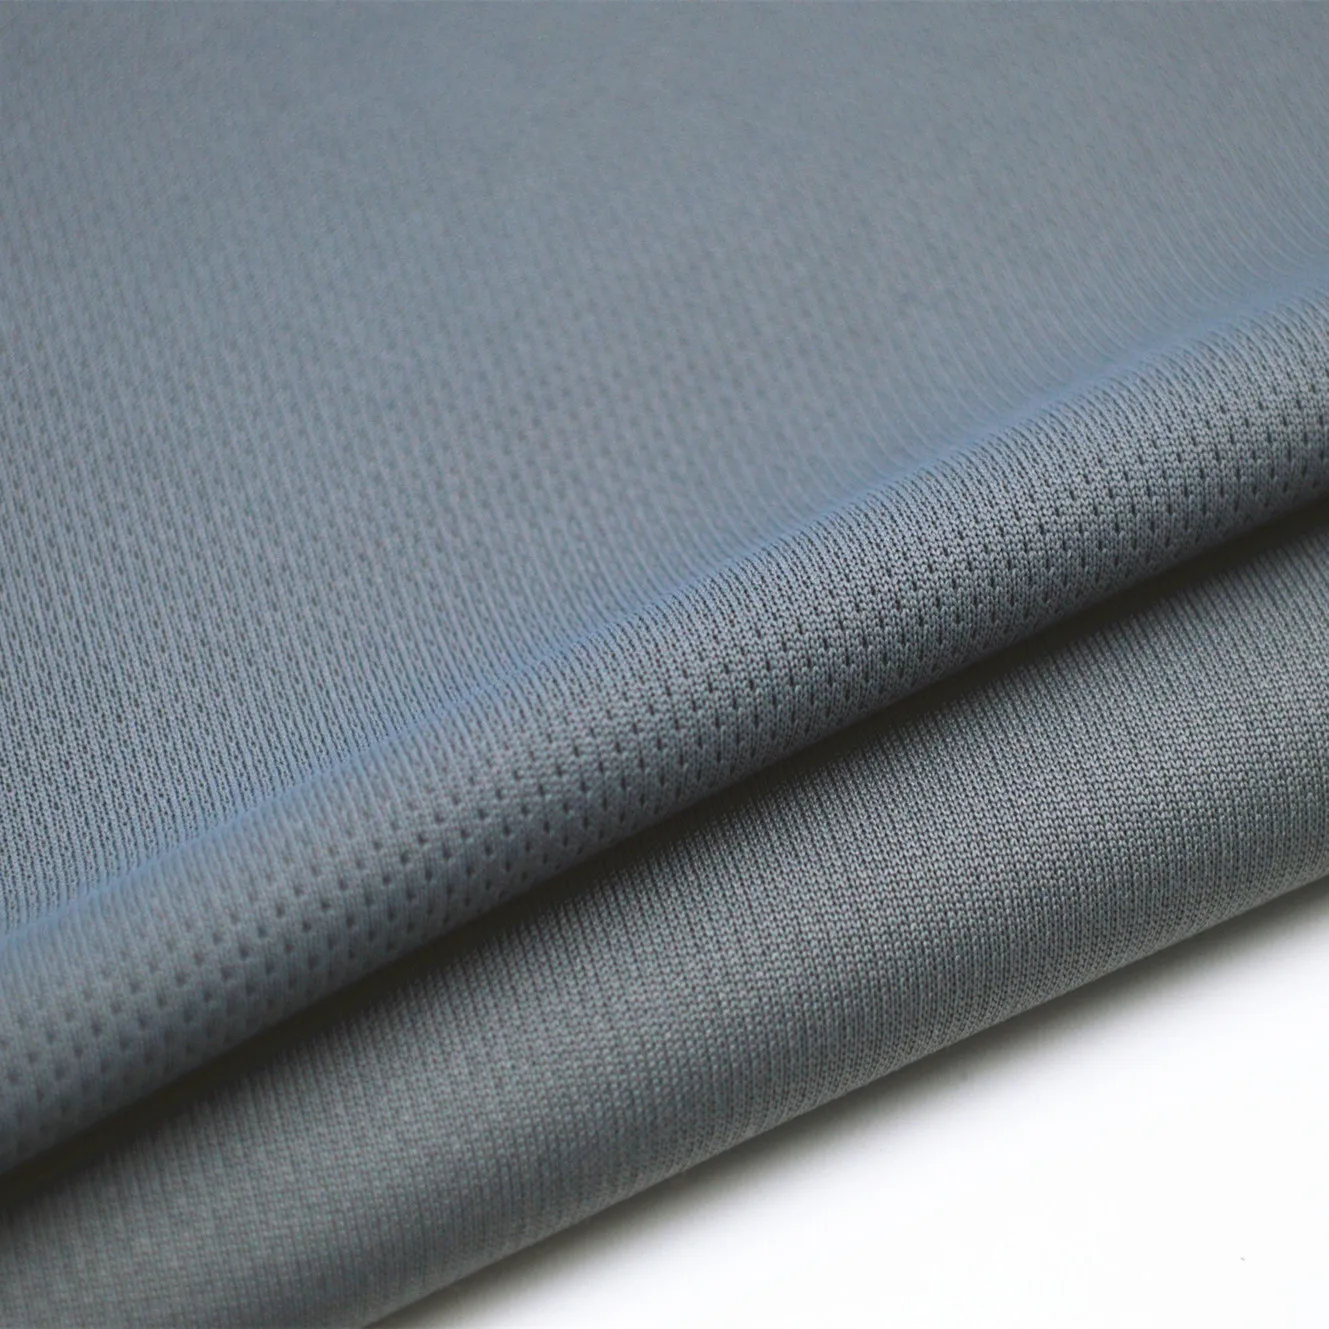 Polyester Breathable Mesh Upf50 Fabric For Sportswear Moisture Wicking ...